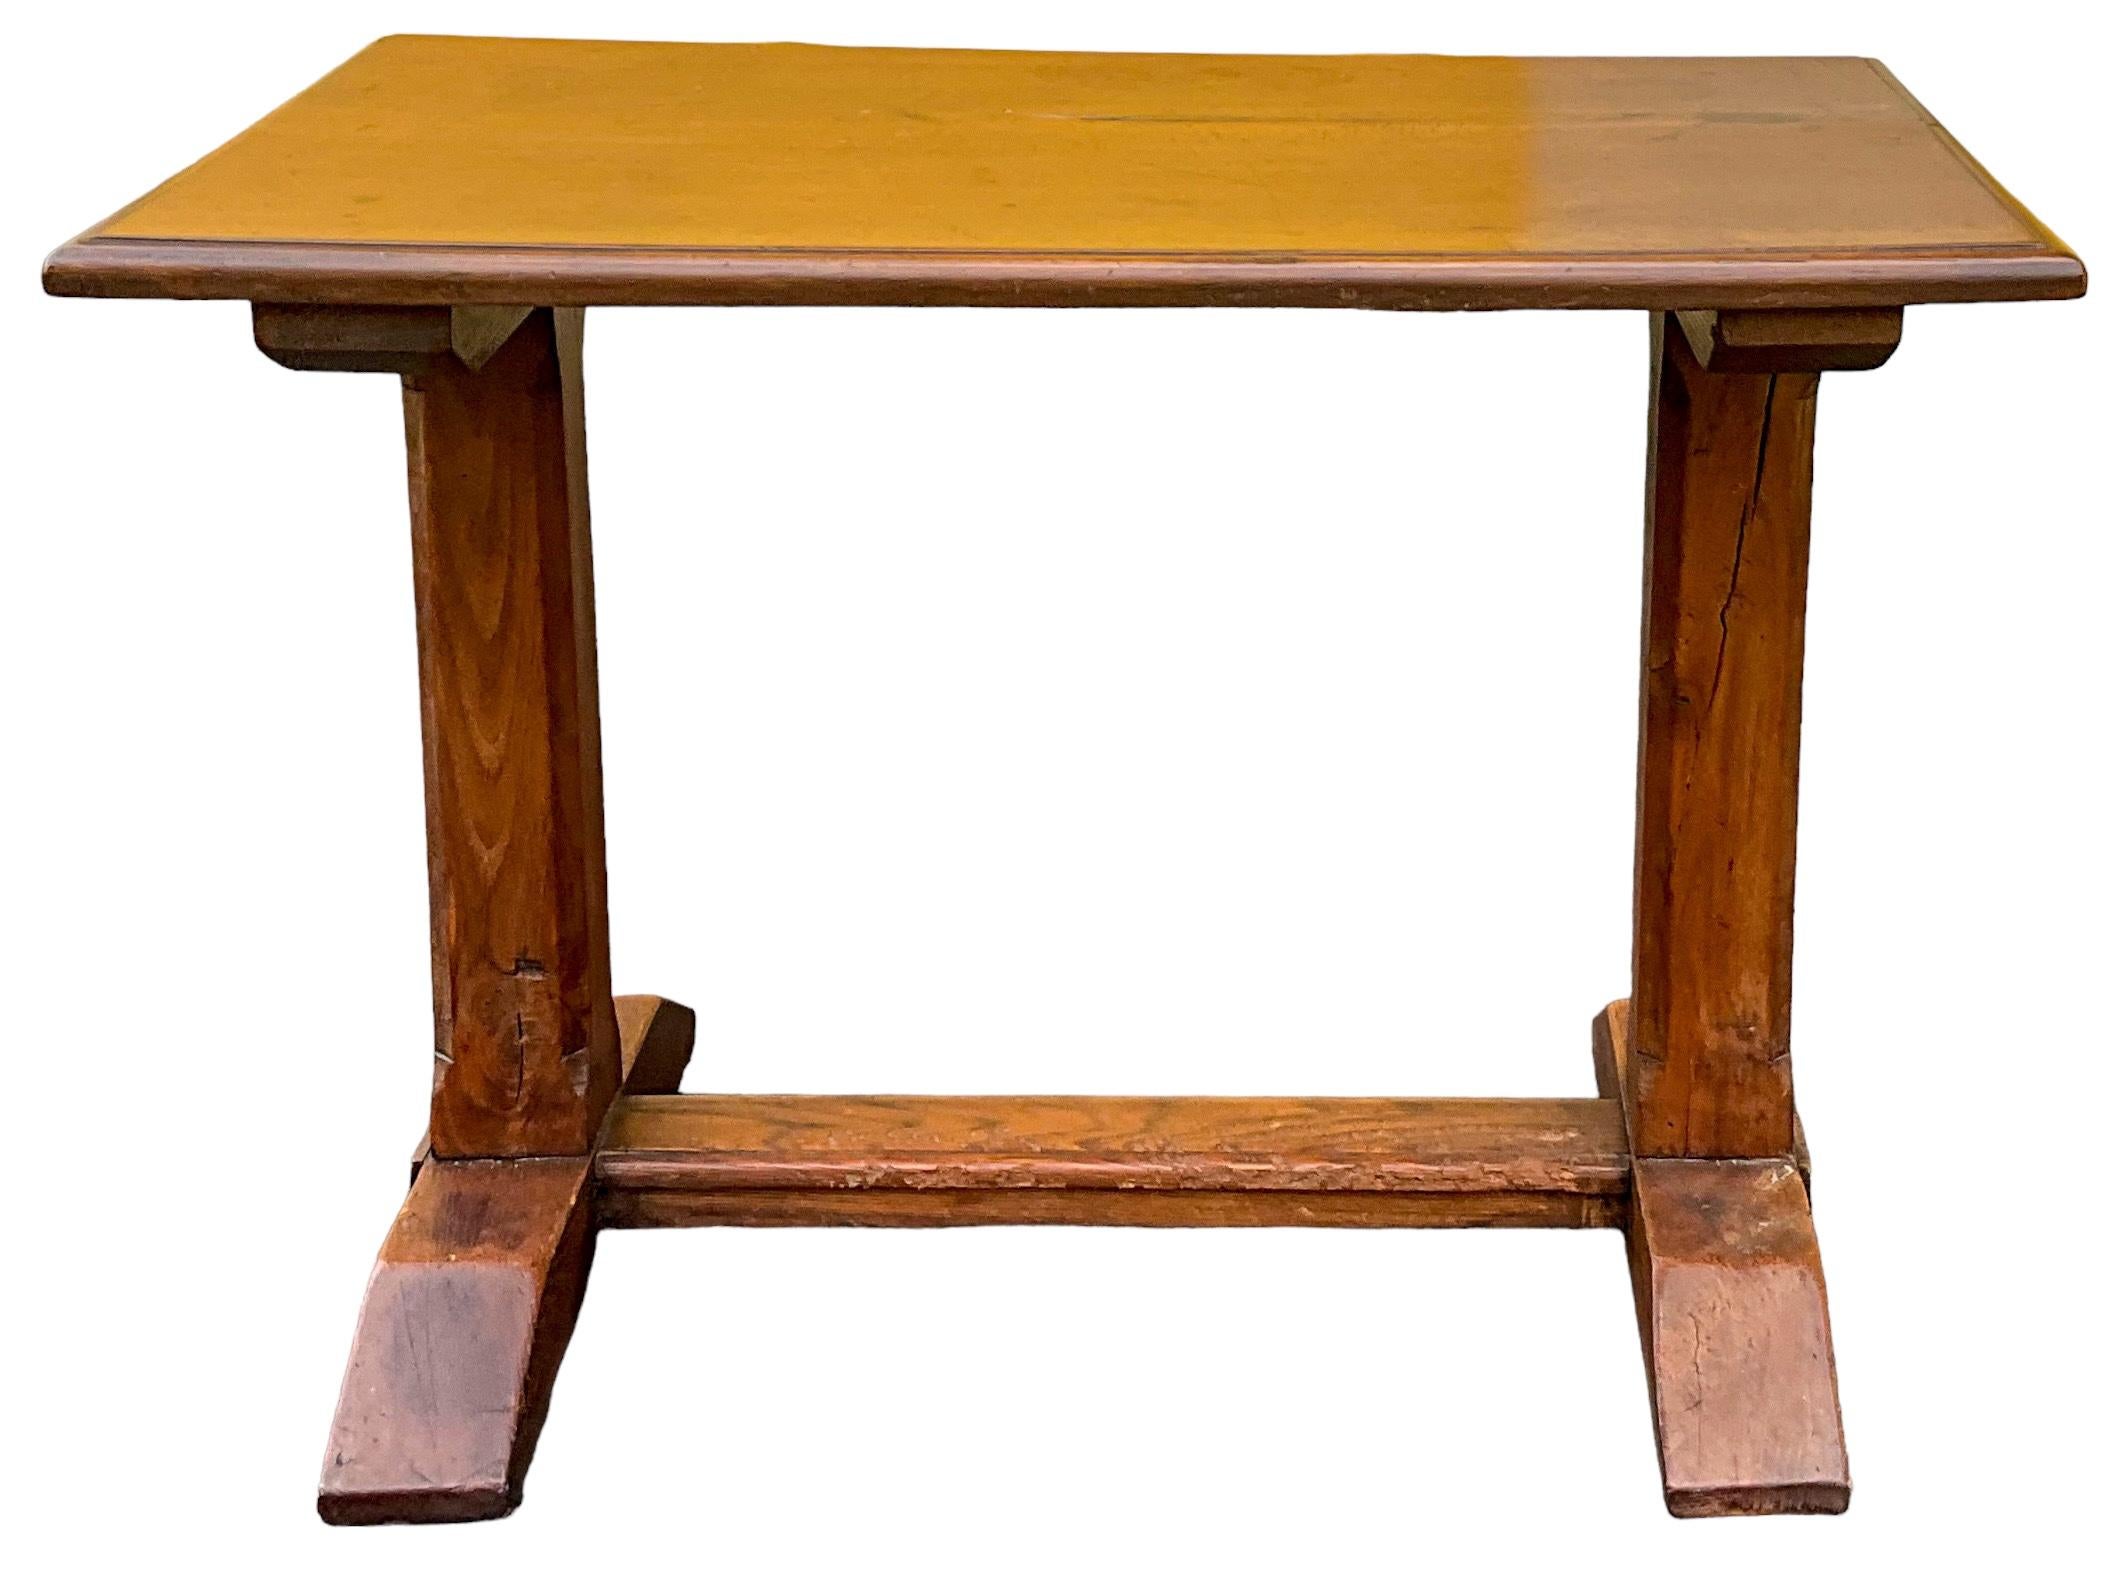 20th Century 20th-C. Rustic Primitive French Carved Walnut Side Tables Att. To Grange - Pair